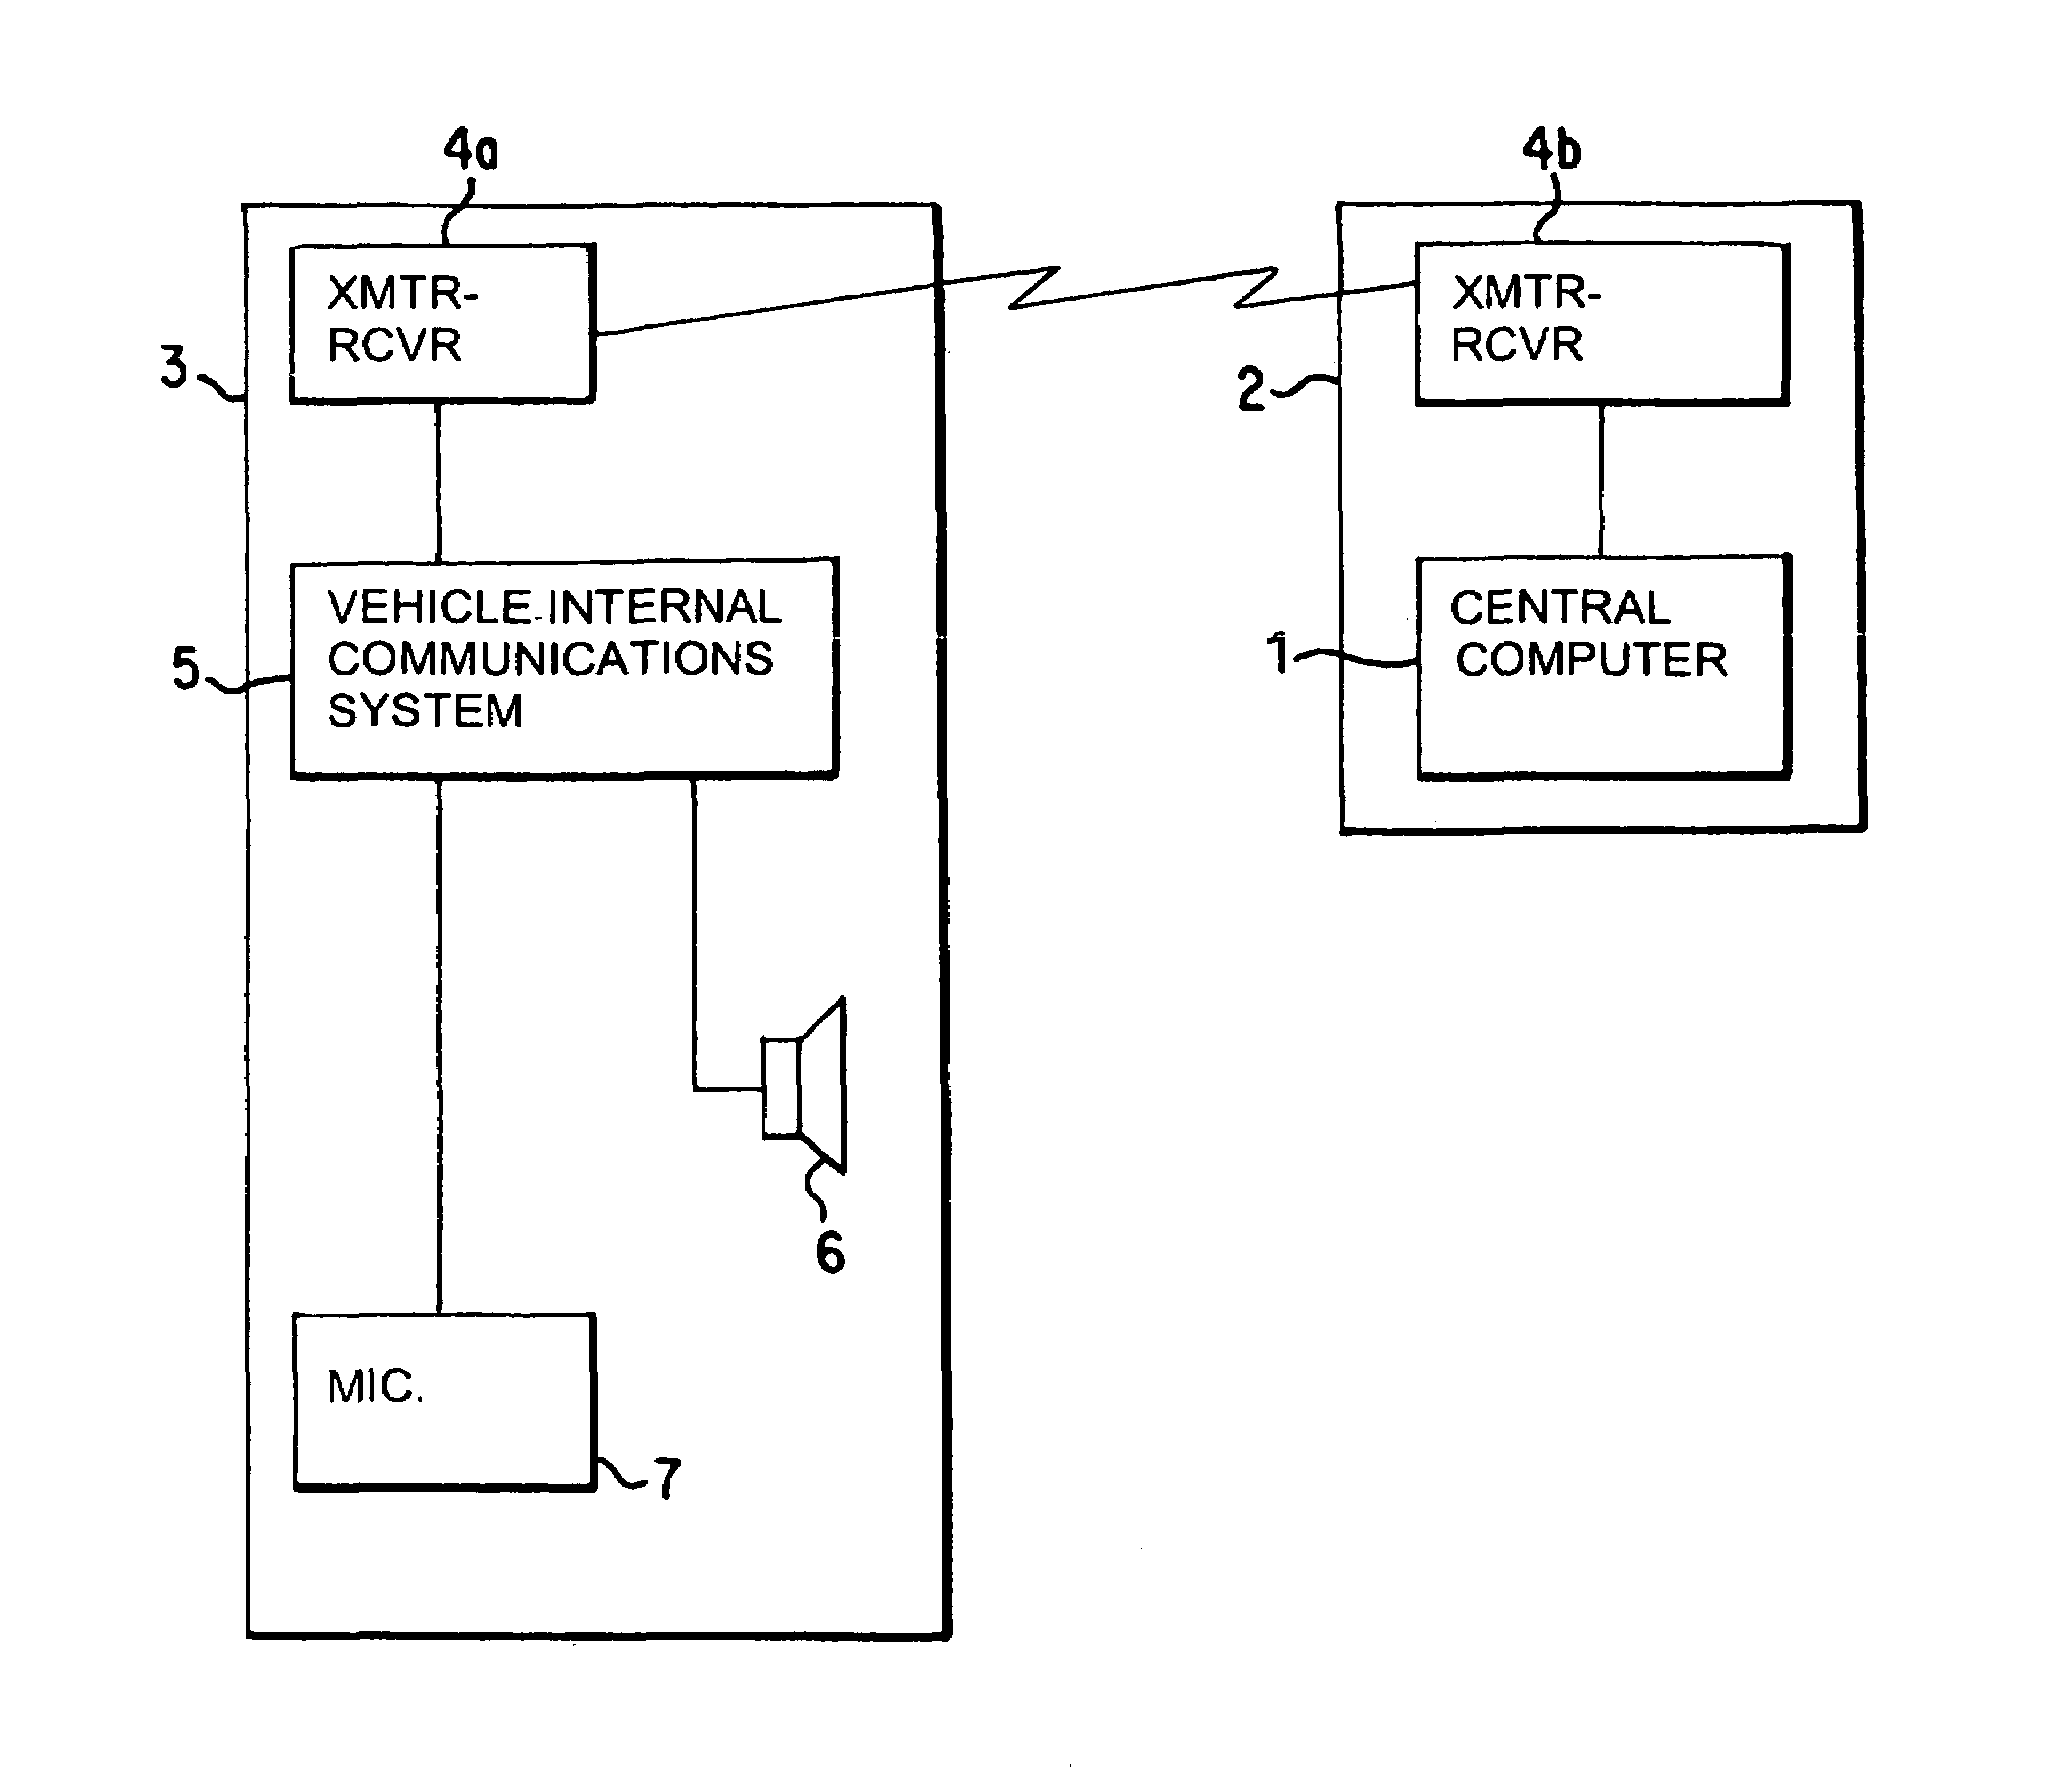 Method and apparatus for wireless transmission of messages between a vehicle-internal communication system and a vehicle-external central computer